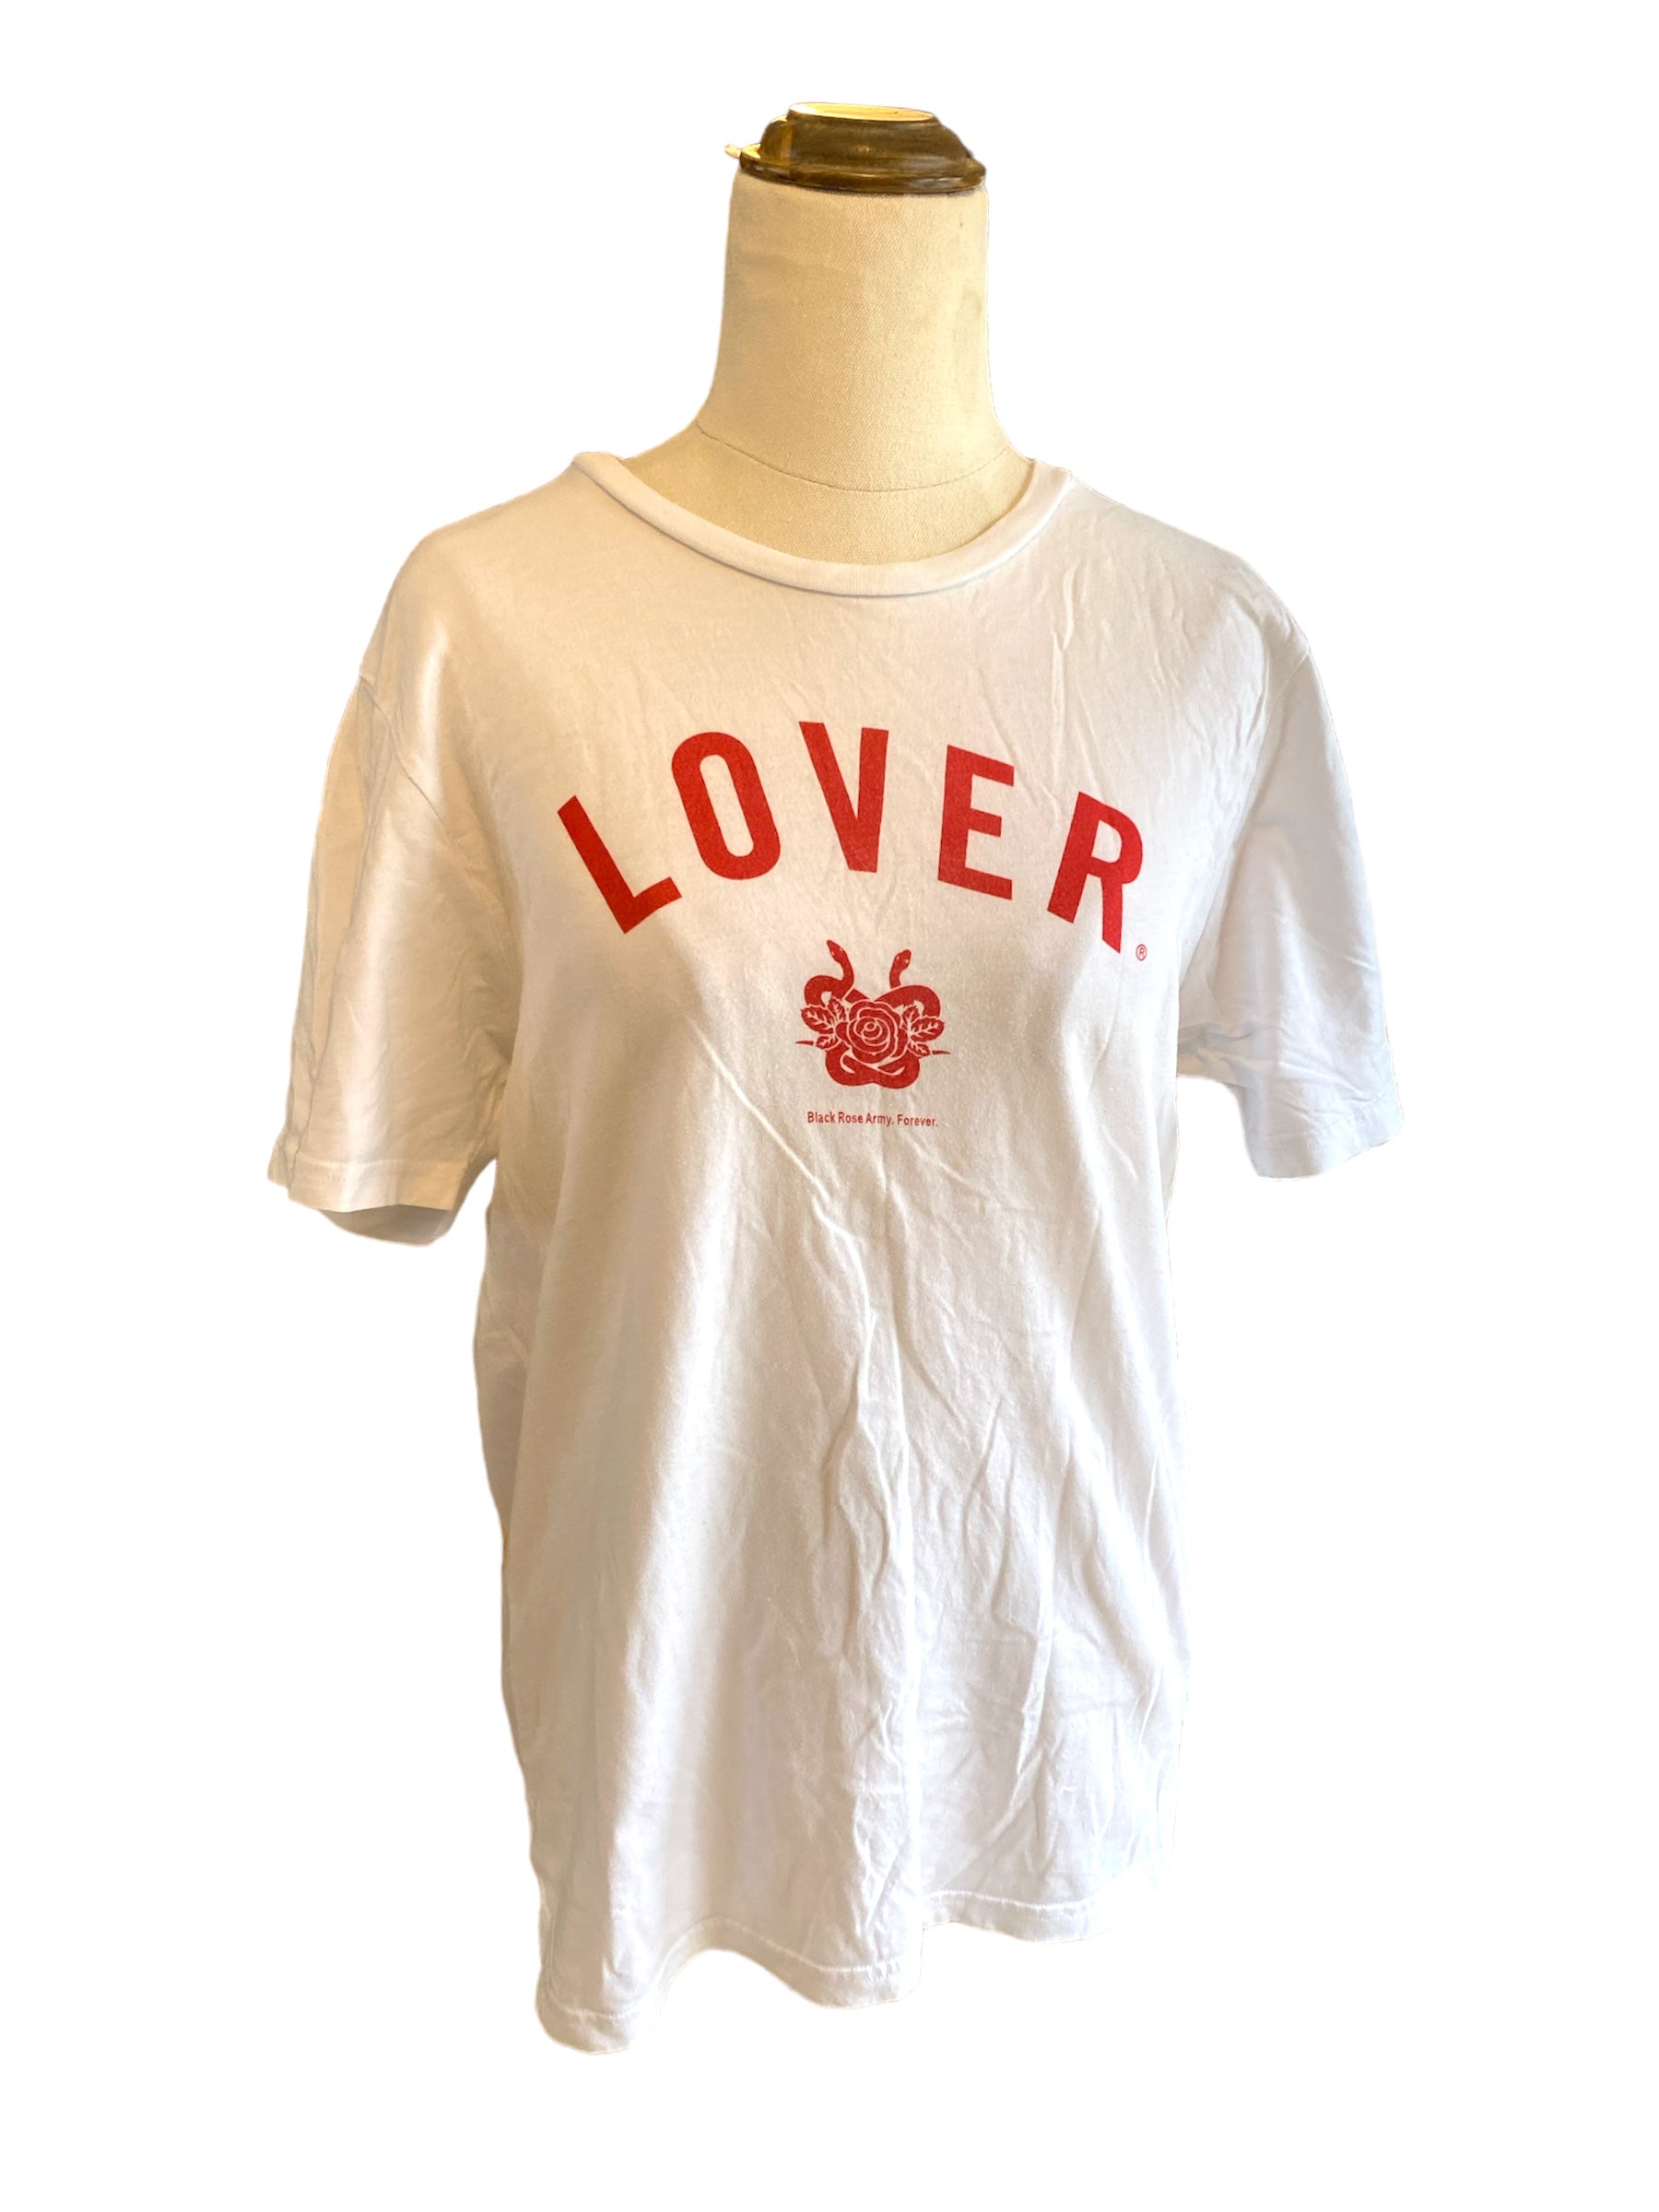 Lover White t Shirt | Size S